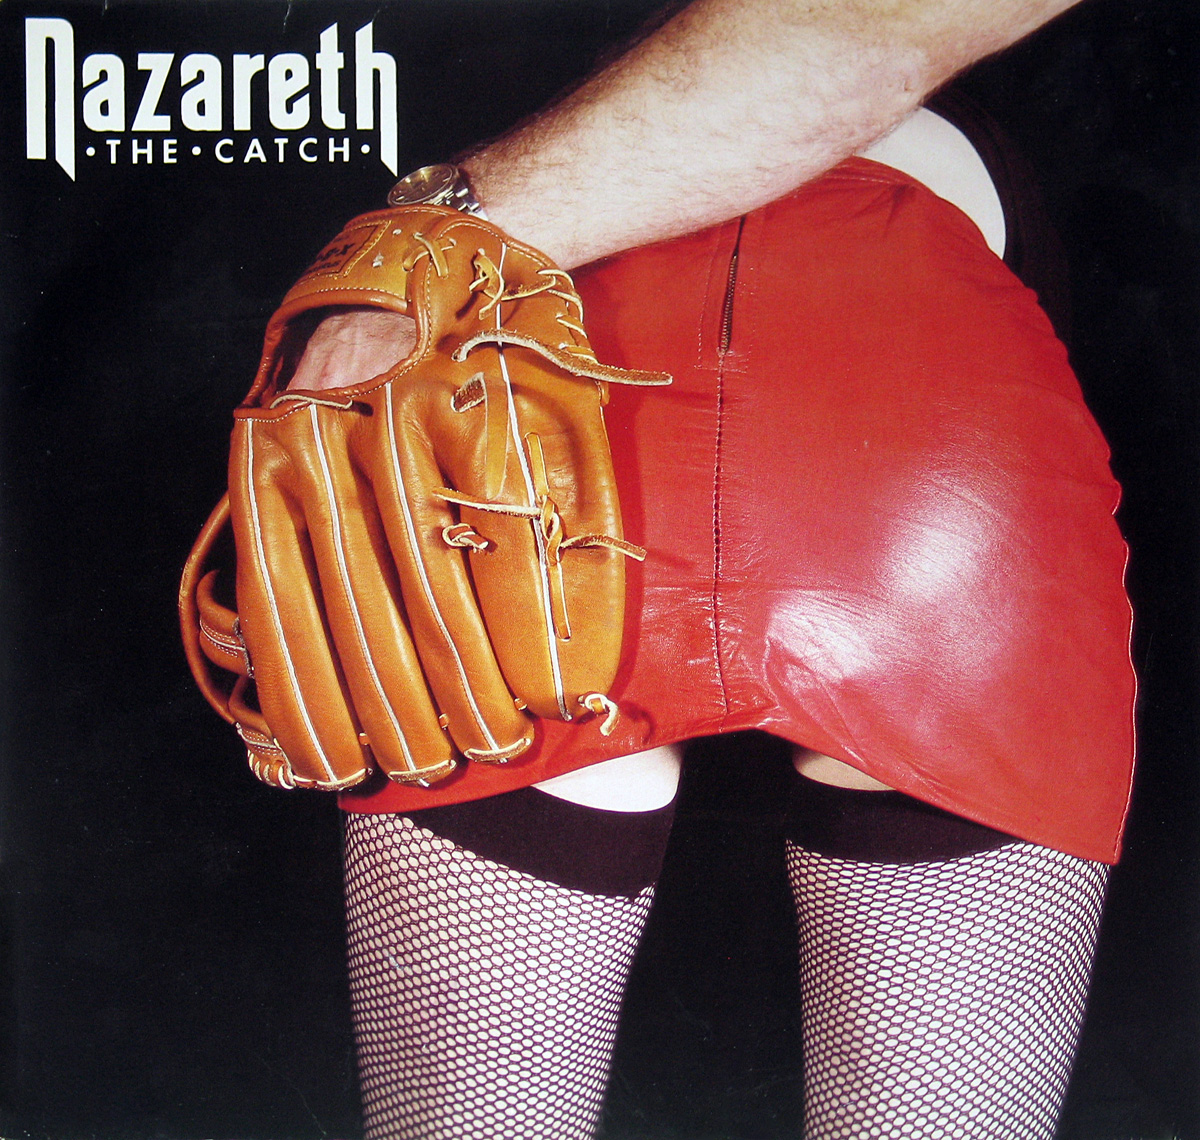 The cover features a   close-up image of a woman's buttocks   clad in tight,   revealing red leather pants.